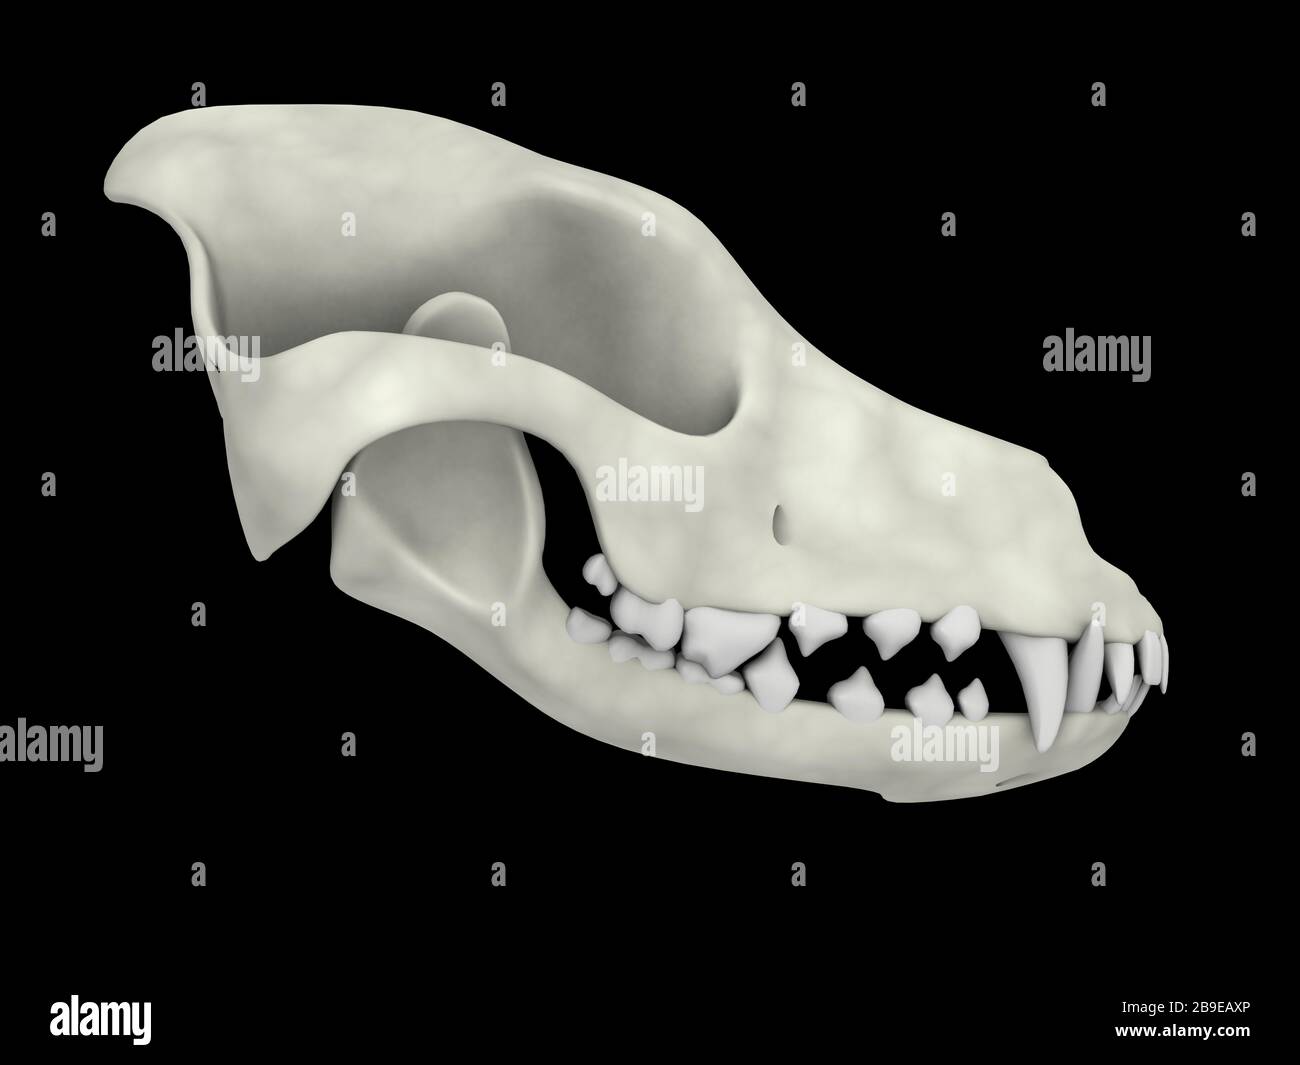 Skull of a dog, side view. Stock Photo